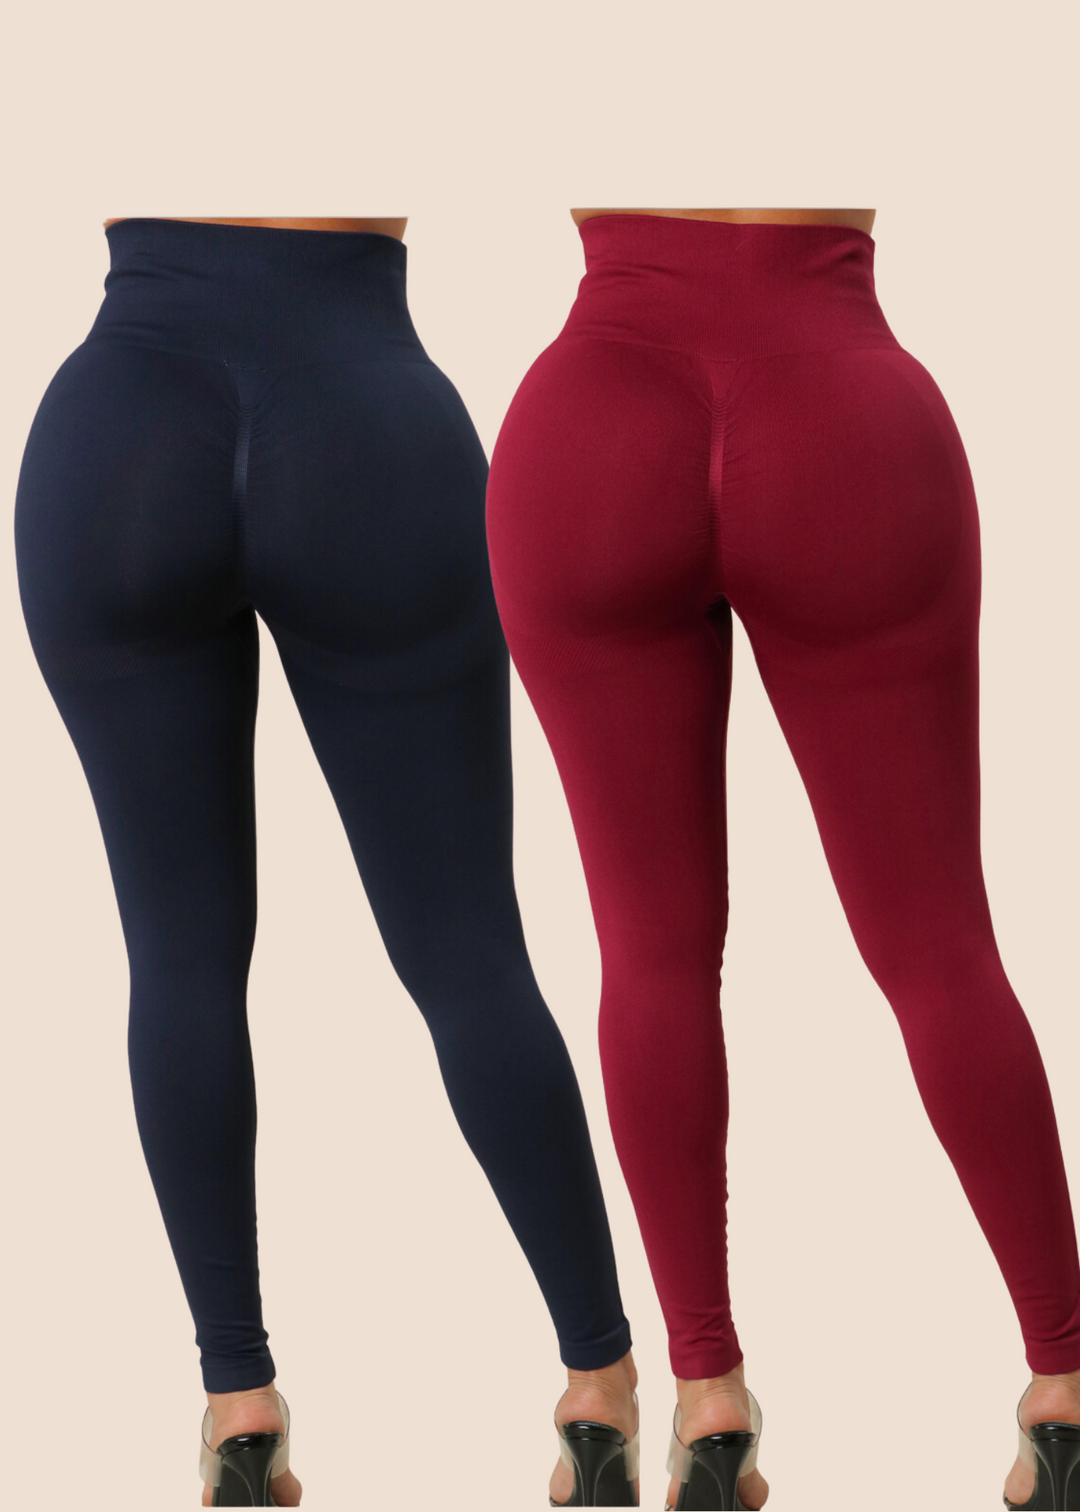 BIG BOOTY LOVER Leggings for Sale by FortyFourTeez